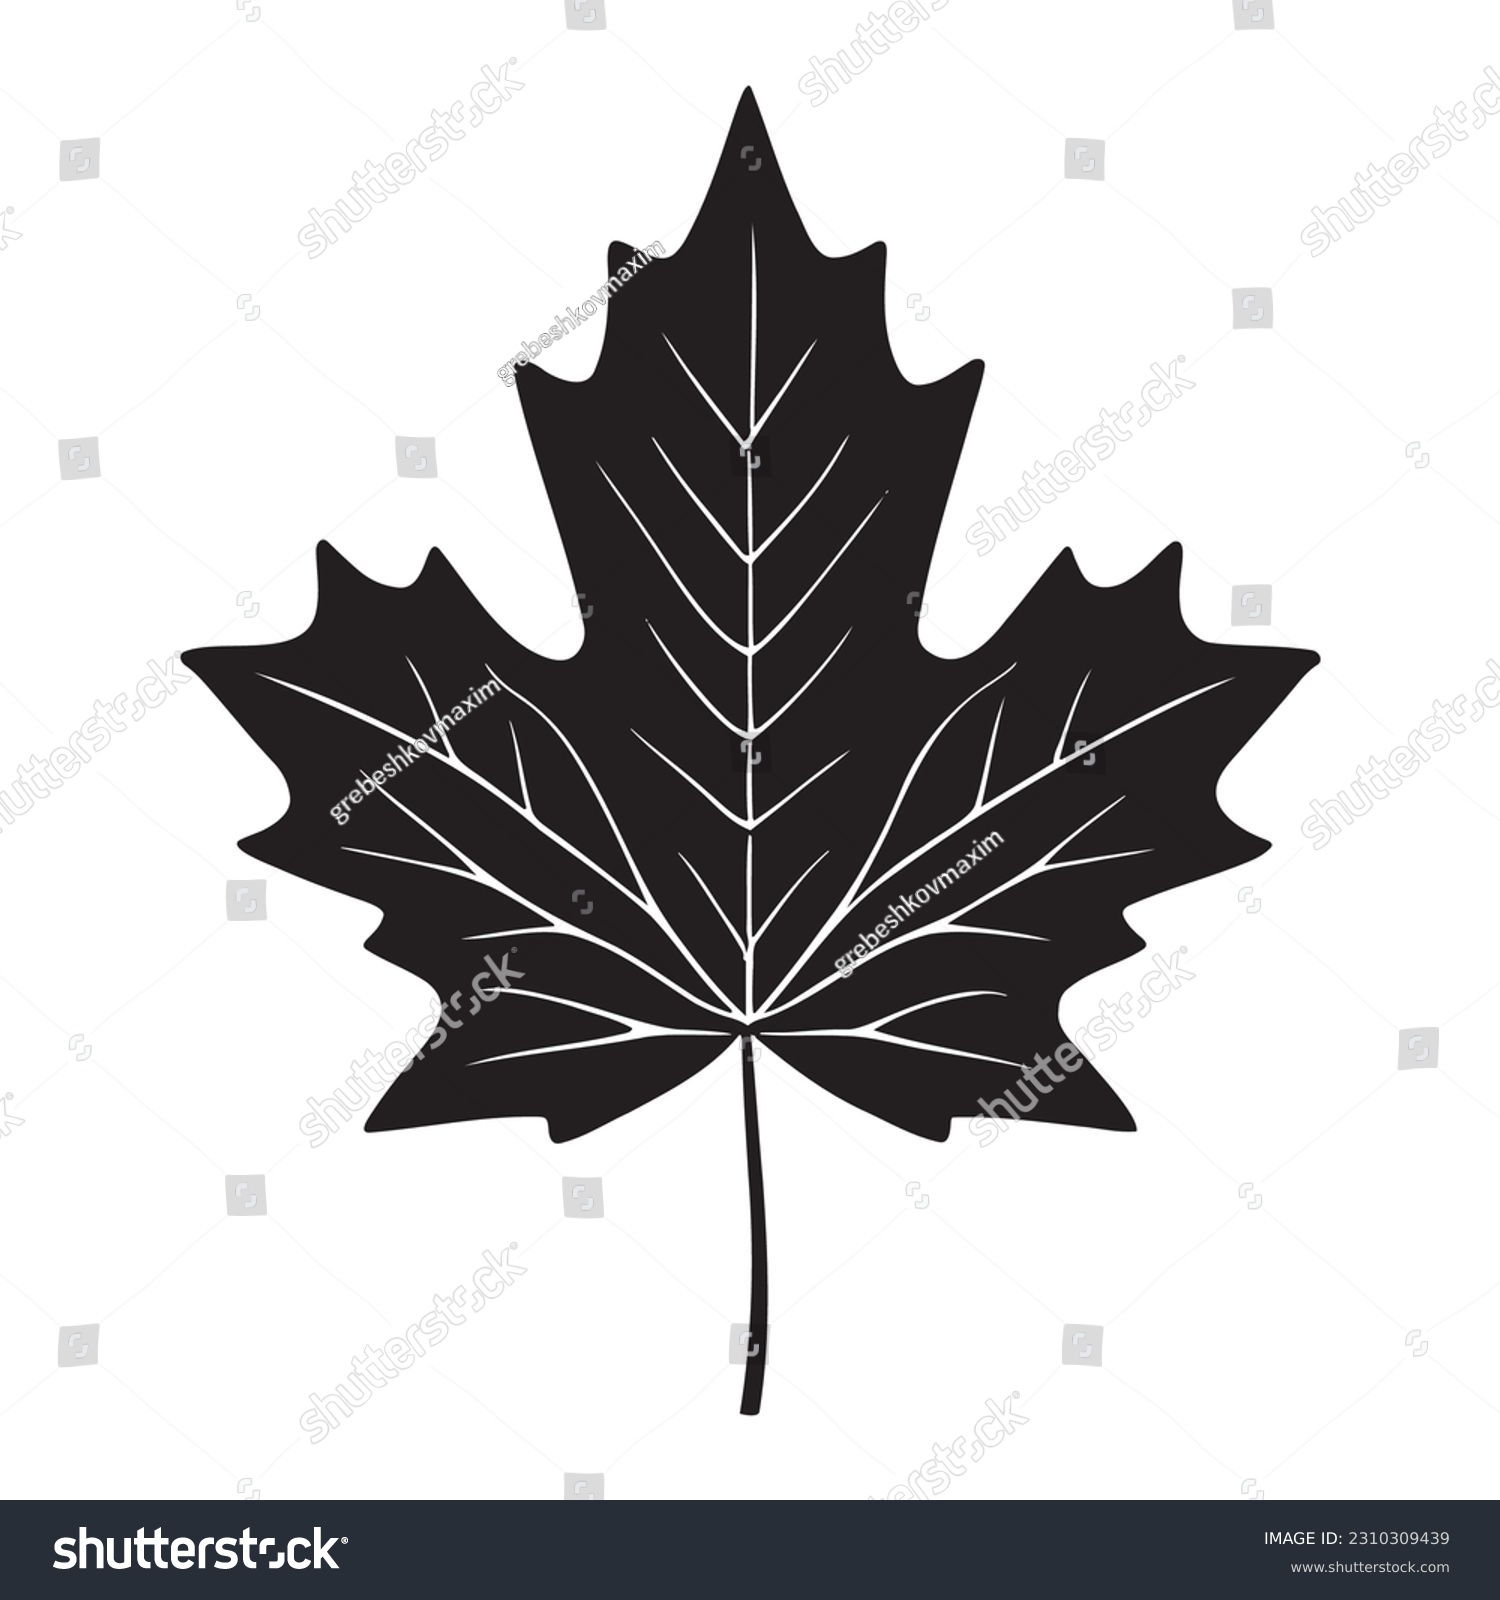 Maple leaf silhouette logo isolated on white background, vector icon #2310309439